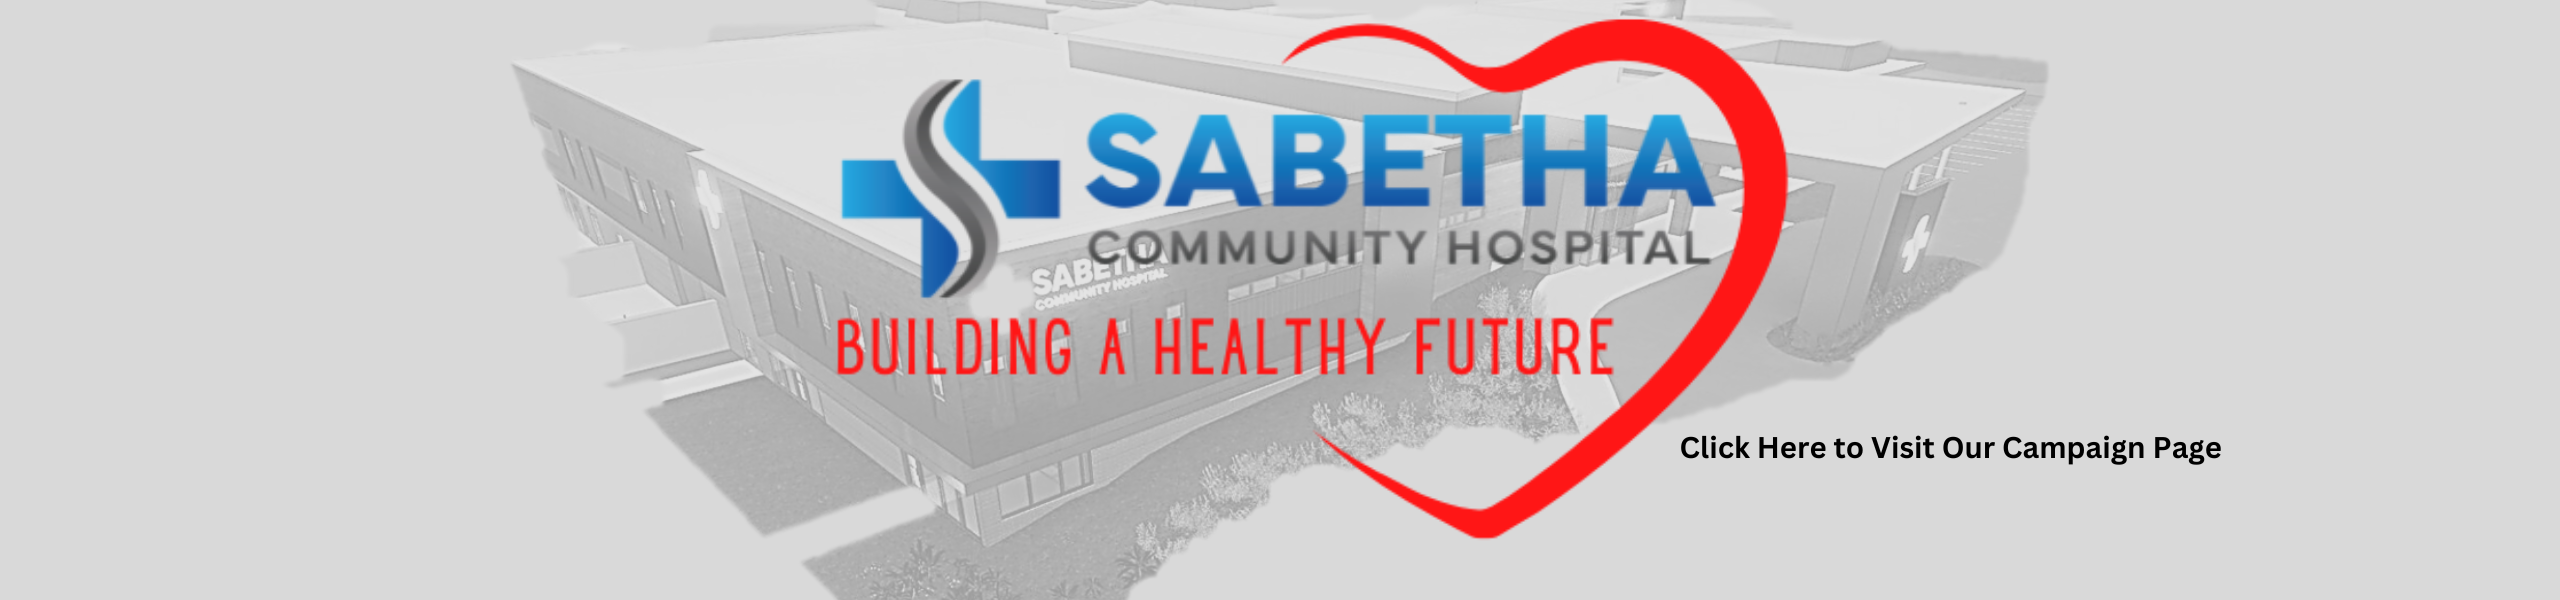 Building a Healthy Future; New Hospital Campaign